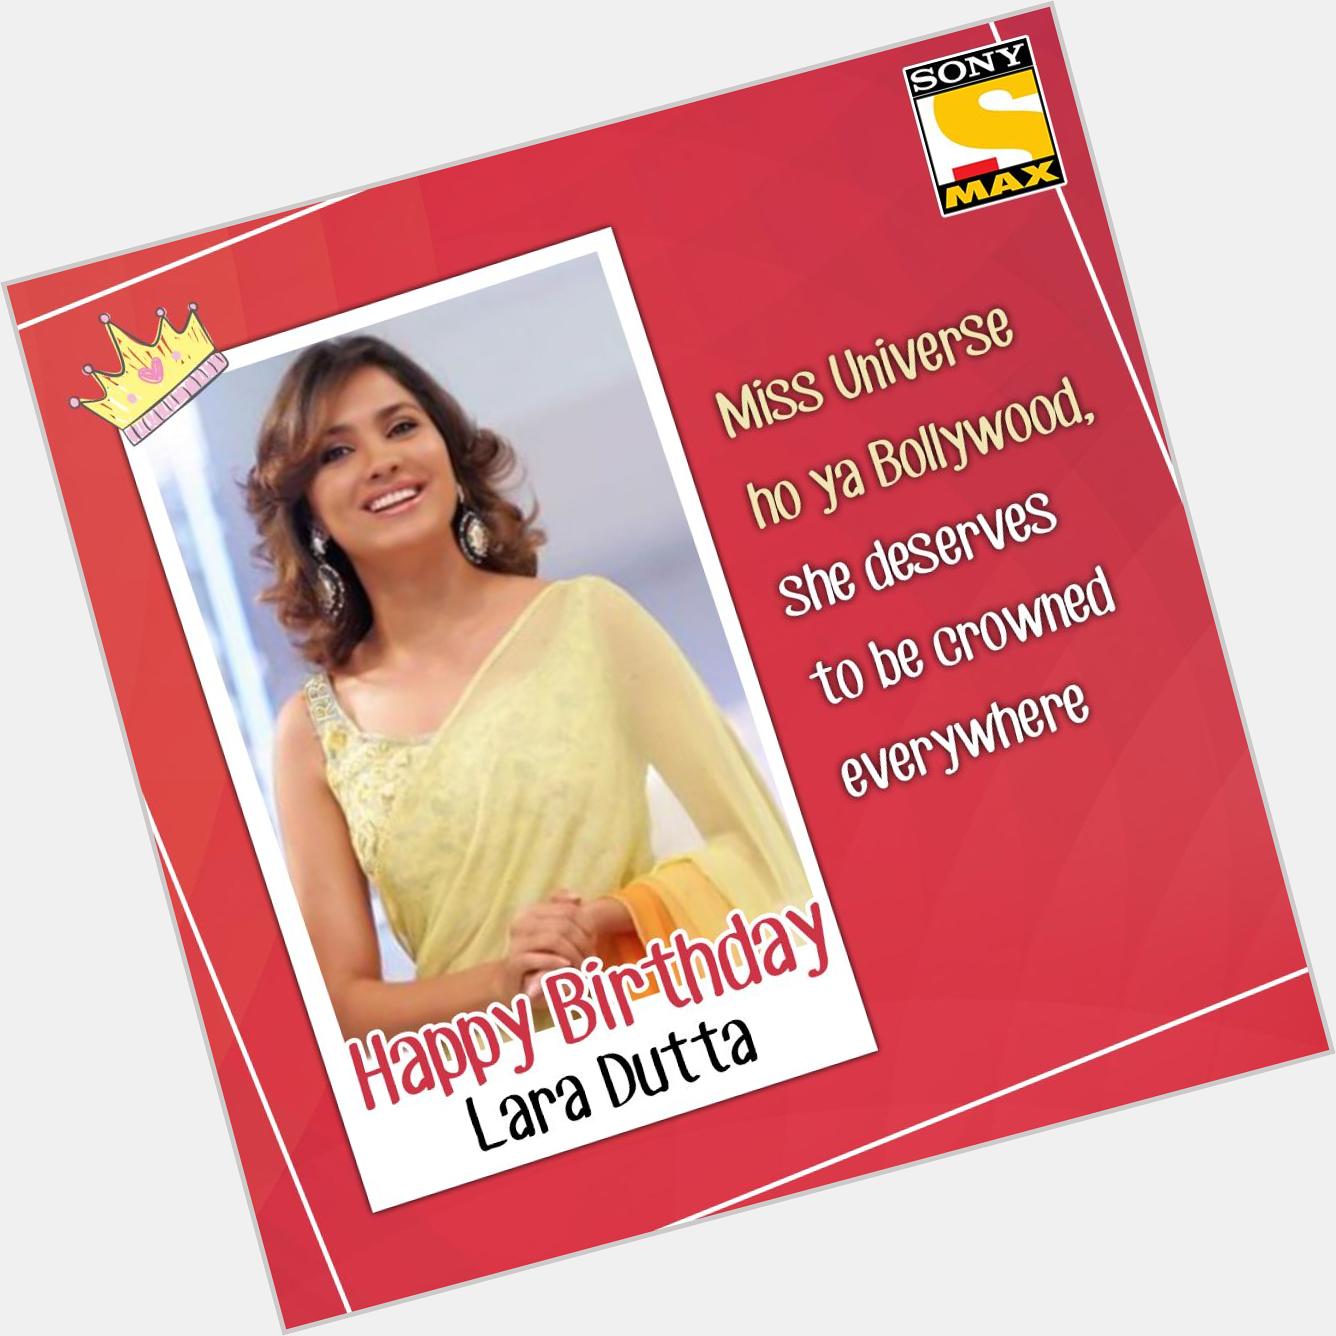 Lara Dutta, your re our love. Happy Birthday to you.   